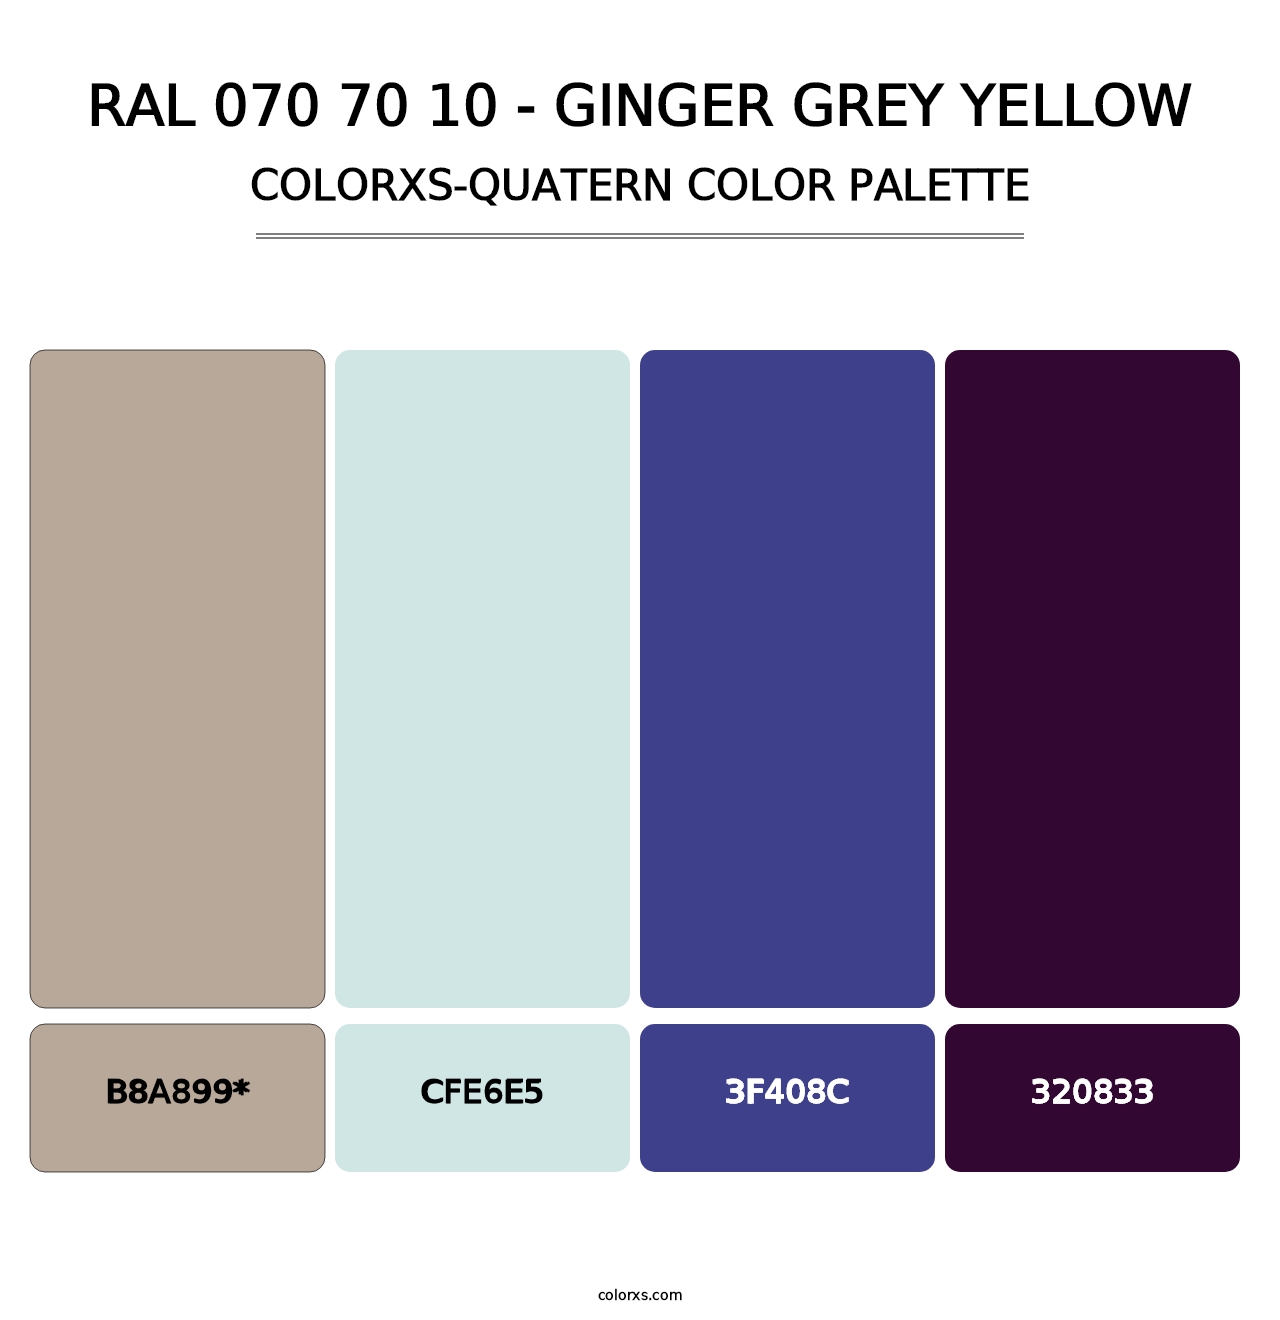 RAL 070 70 10 - Ginger Grey Yellow - Colorxs Quatern Palette